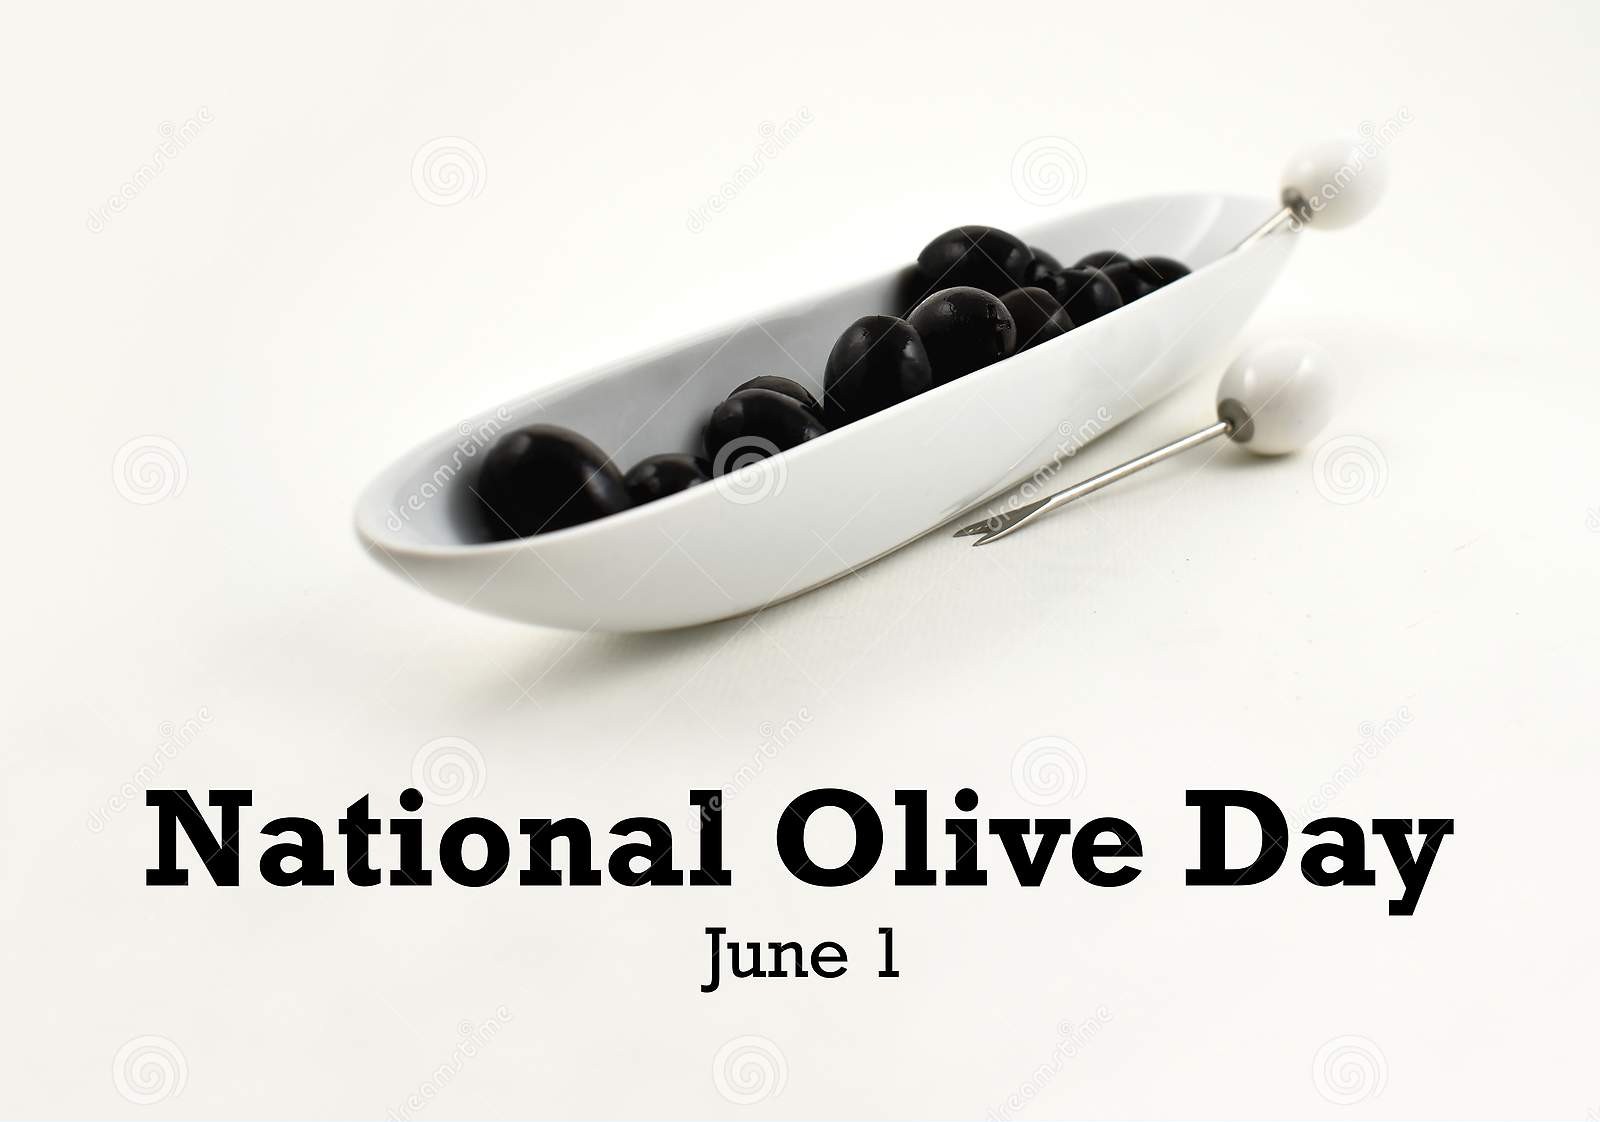 National Olive Day Images